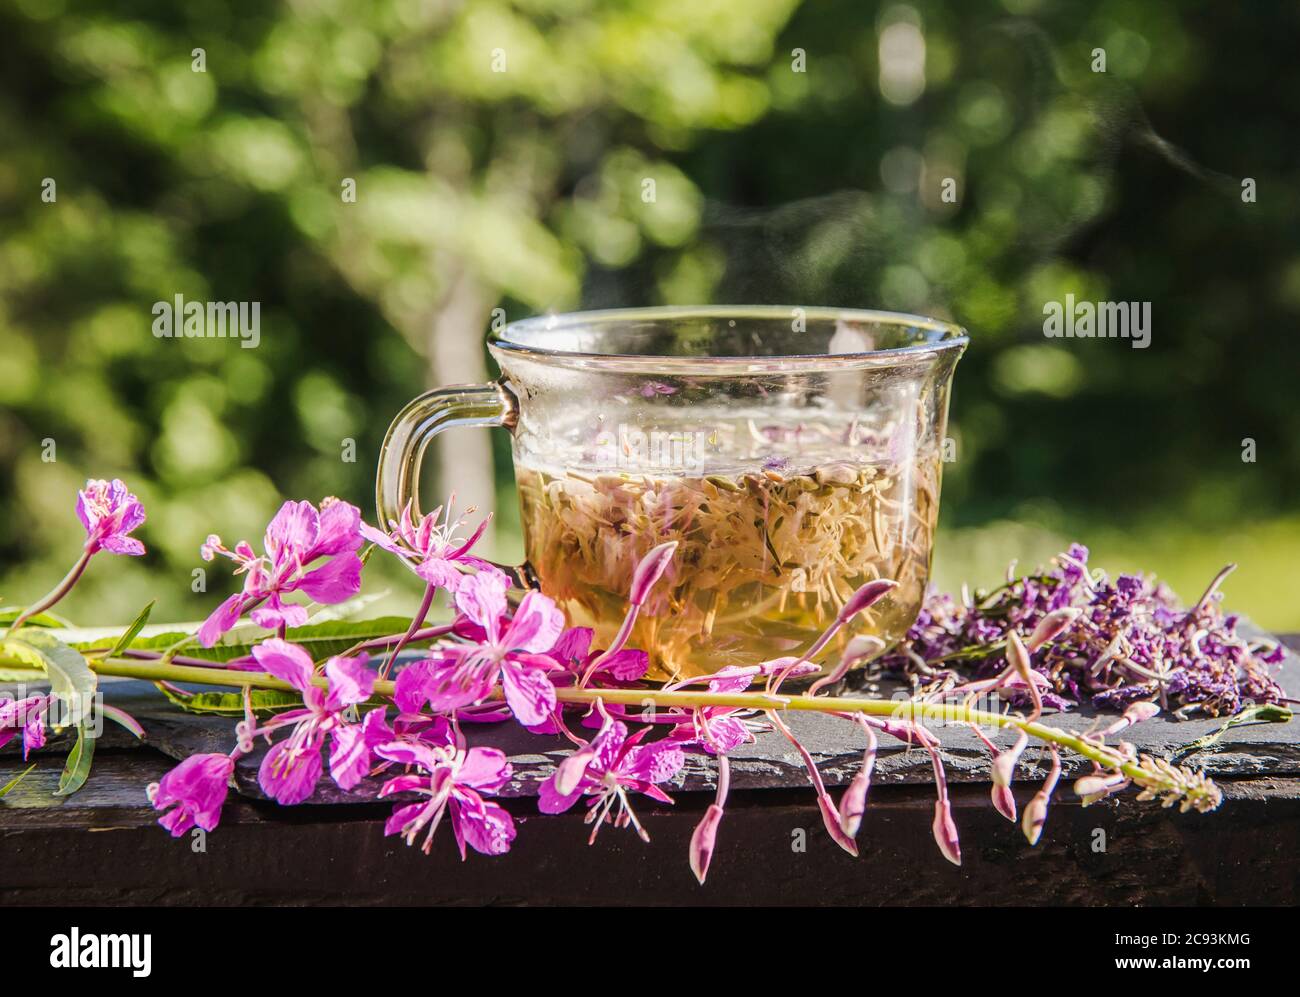 Chamaenerion angustifolium( fireweed, great willowherb, rosebay willowherb) tea with dry and fresh blossoms for decoration. Herbal medicine concept. Stock Photo